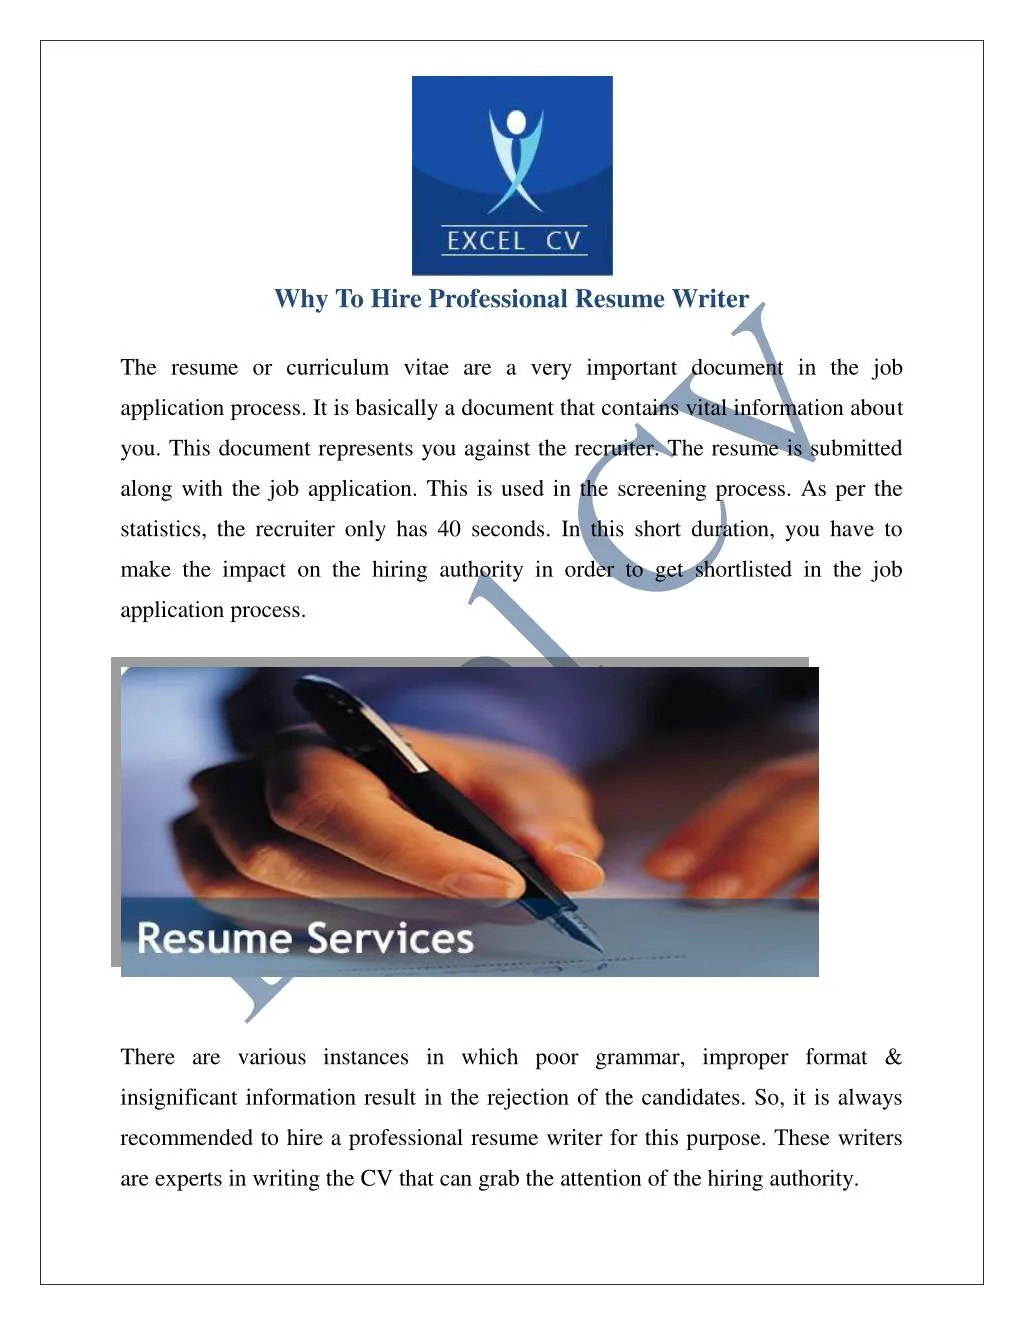 Professional cv writing companies in india